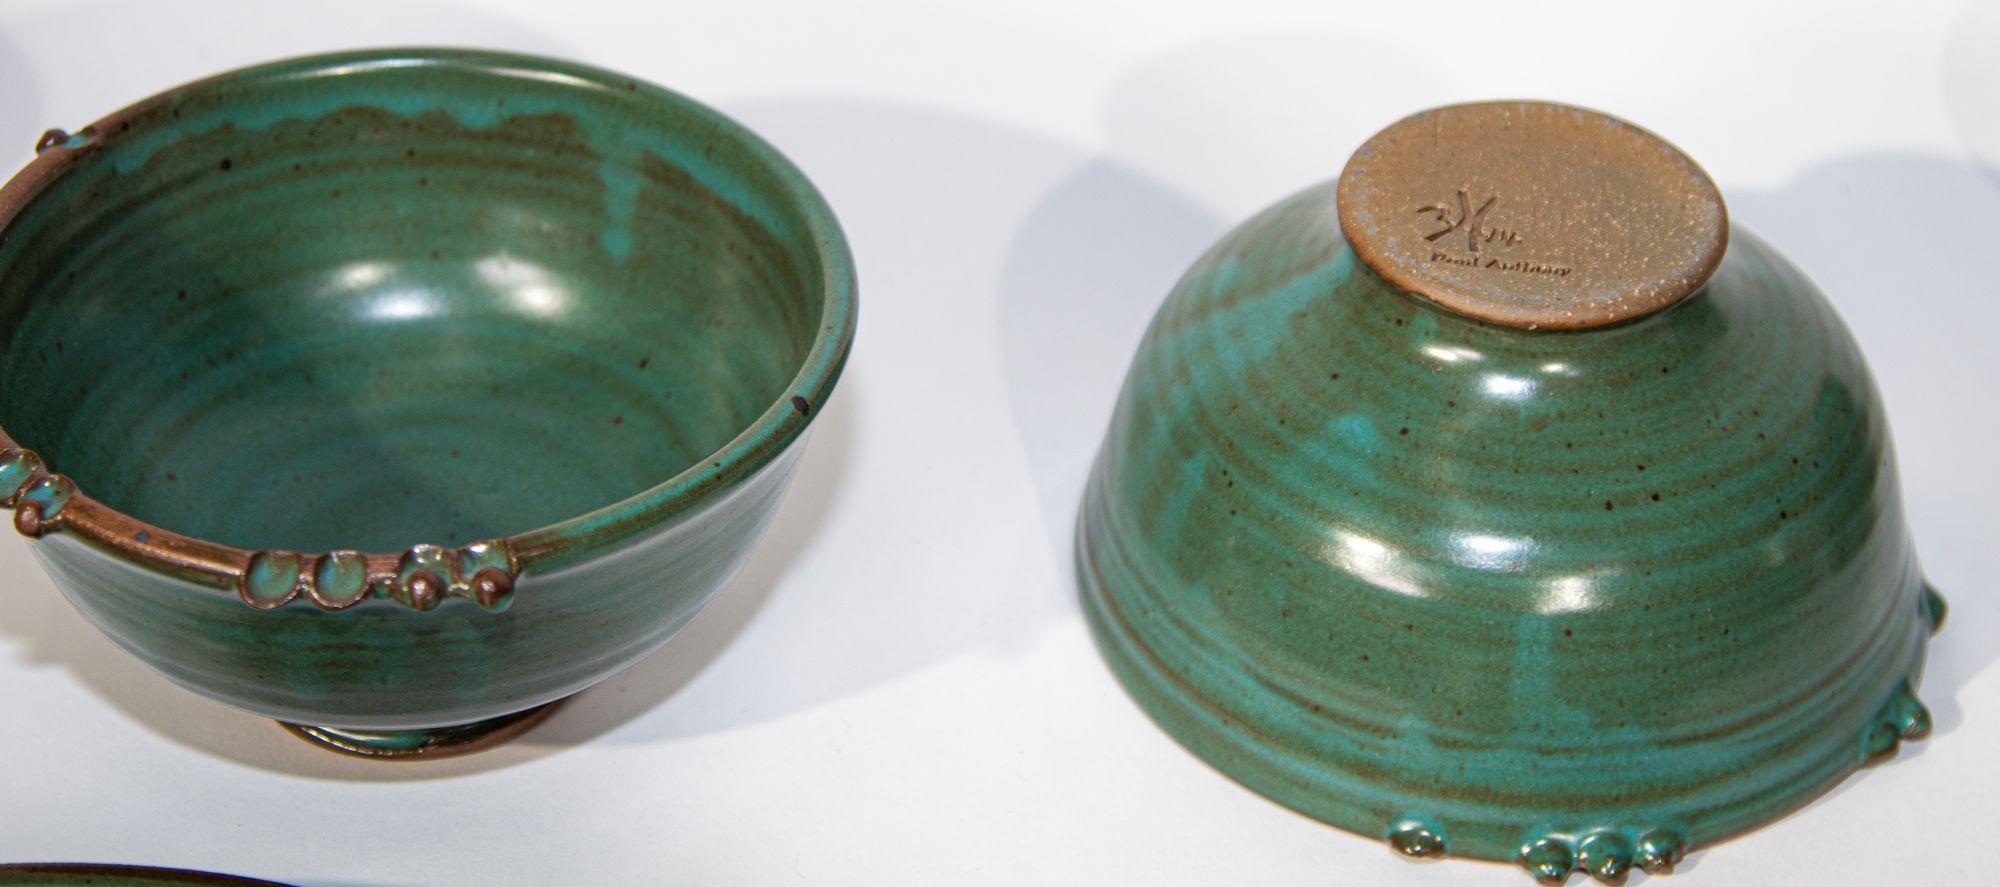 Paul Anthony Vintage Teal Green Stoneware Service Set of 8 For Sale 6